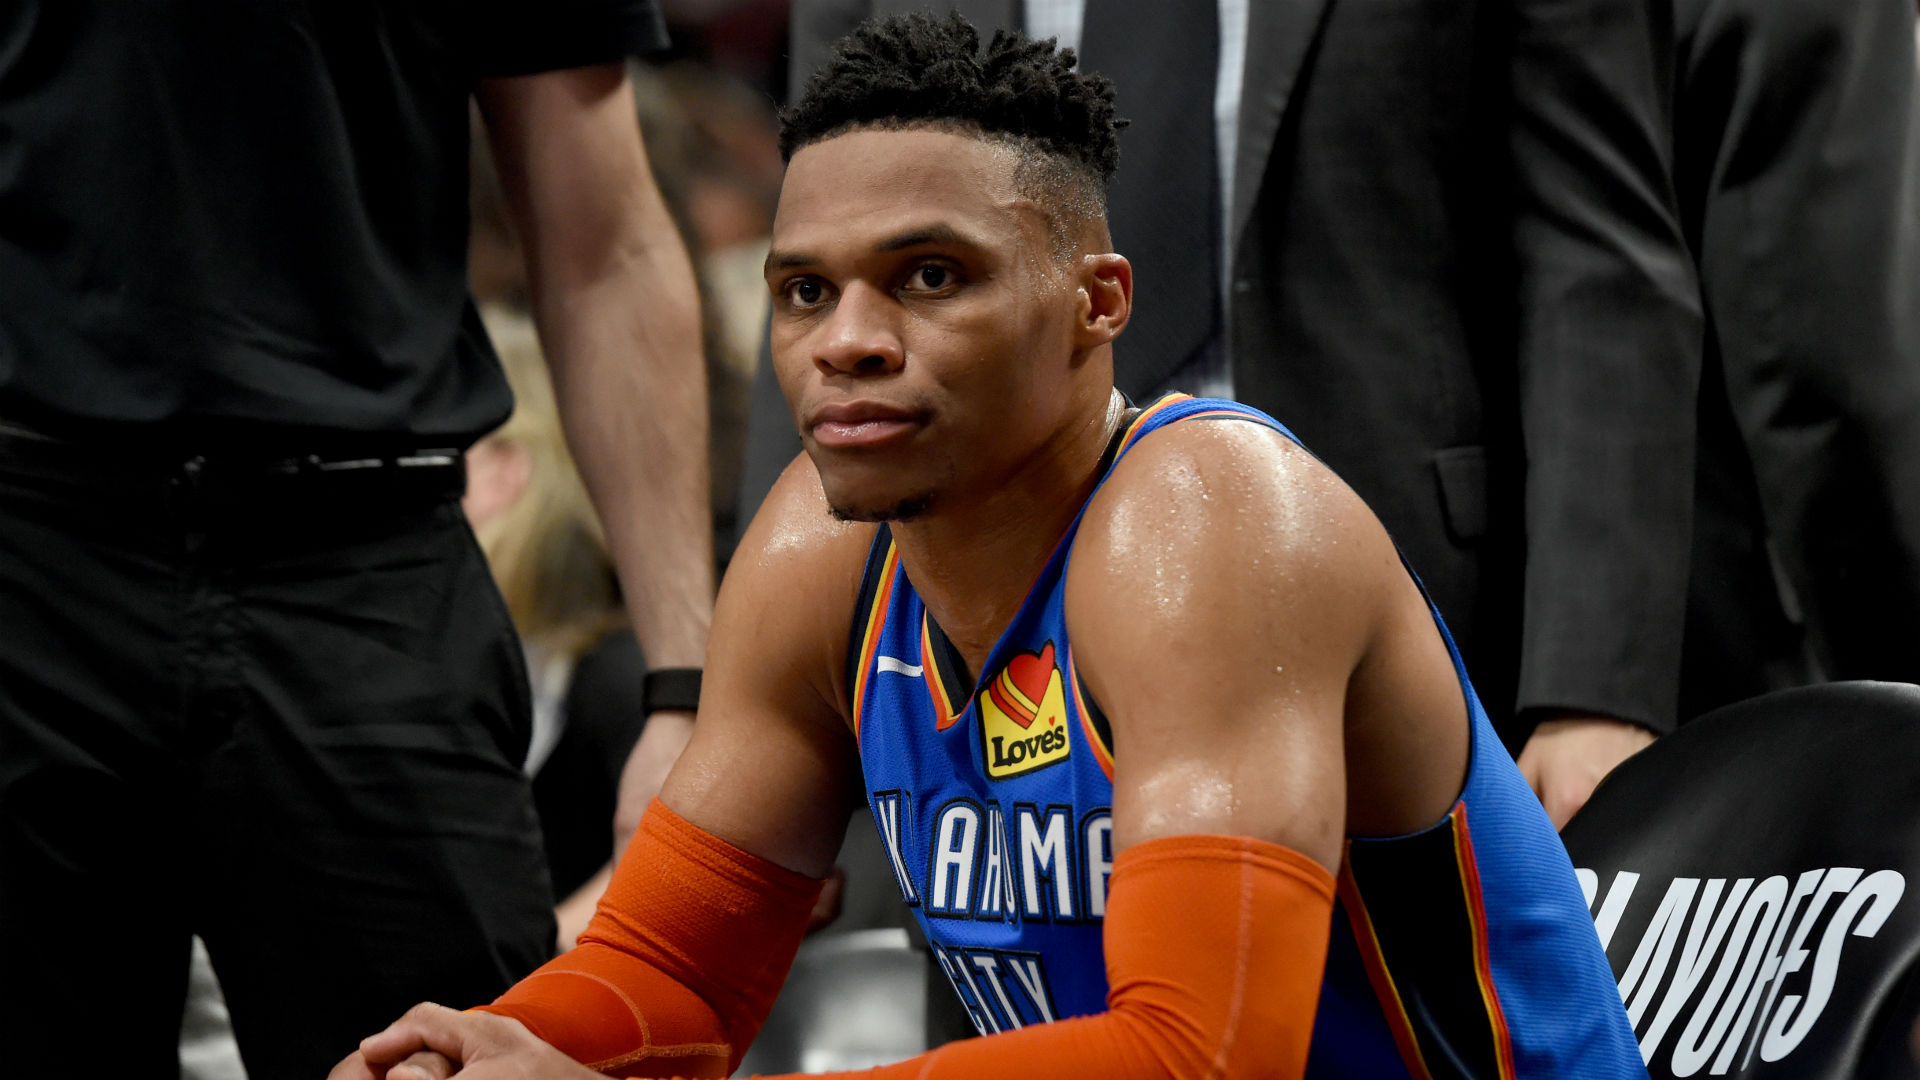 The Houston Rockets' decision to trade Chris Paul for Russell Westbrook makes team owner Tilman Fertitta excited.